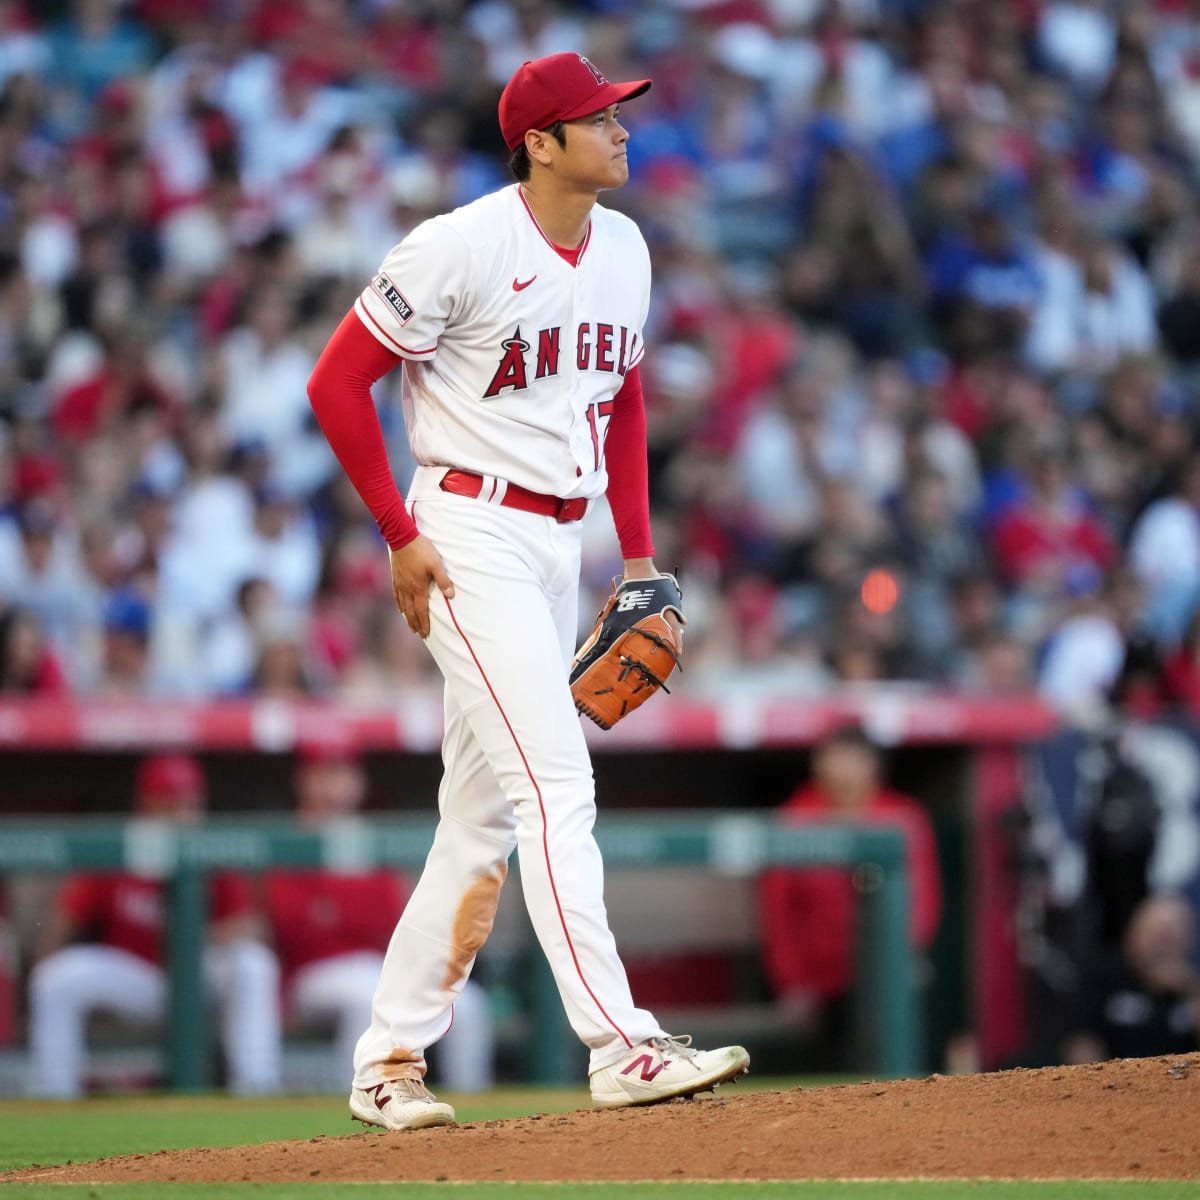 Angels two-way player Shohei Ohtani needs to be continuously